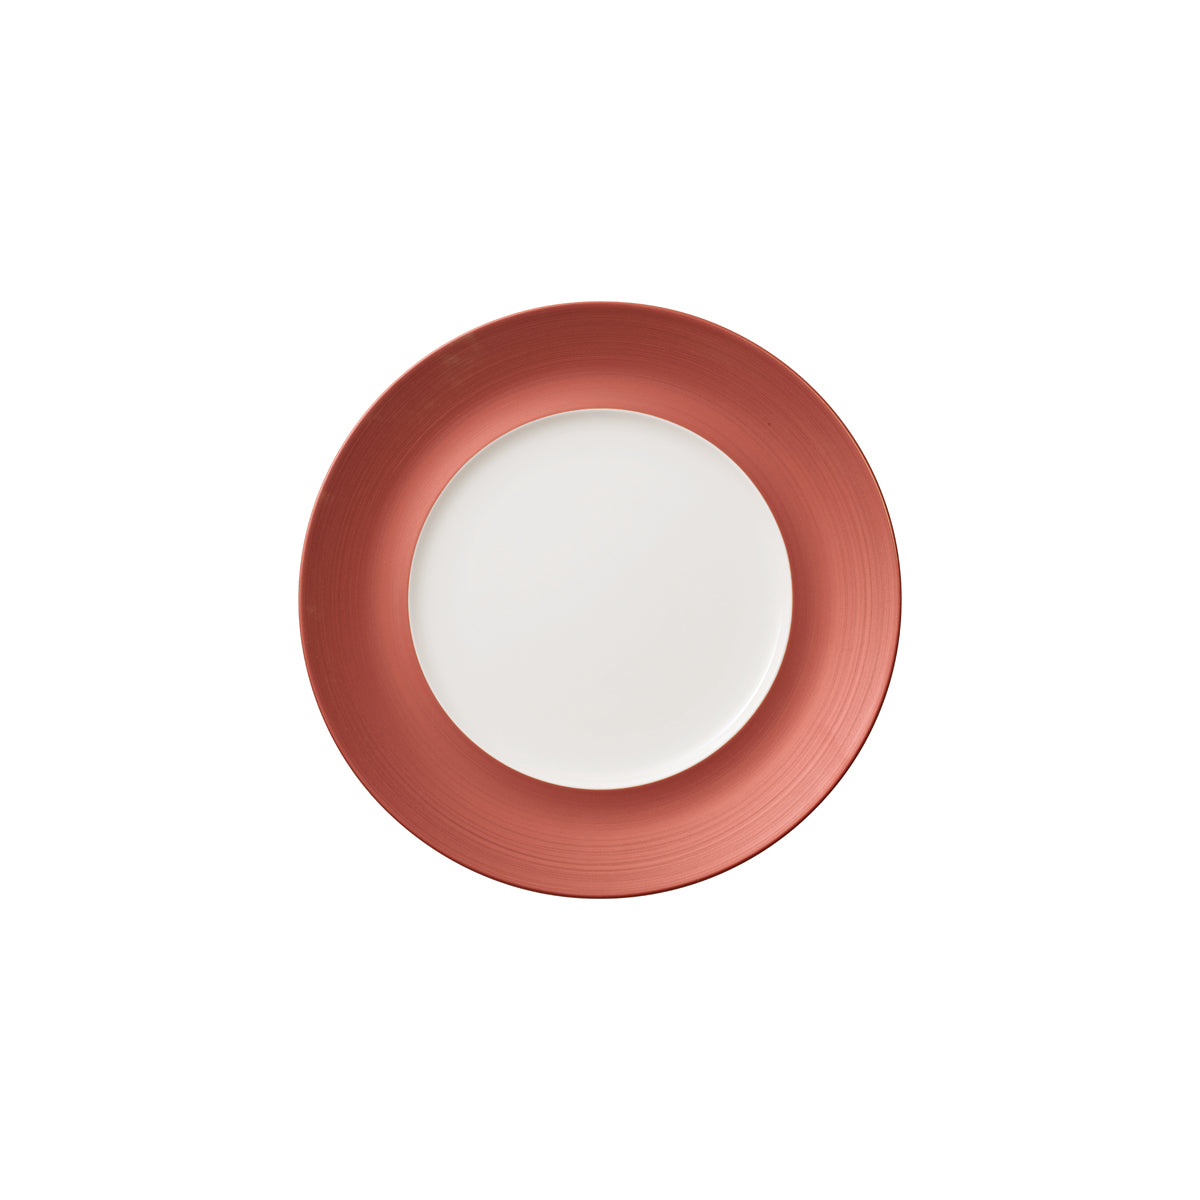 VB16-4070-2796 Villeroy And Boch Villeroy And Boch Copper Glow Plate Outside Wide Rim 290mm / 180mm Tomkin Australia Hospitality Supplies